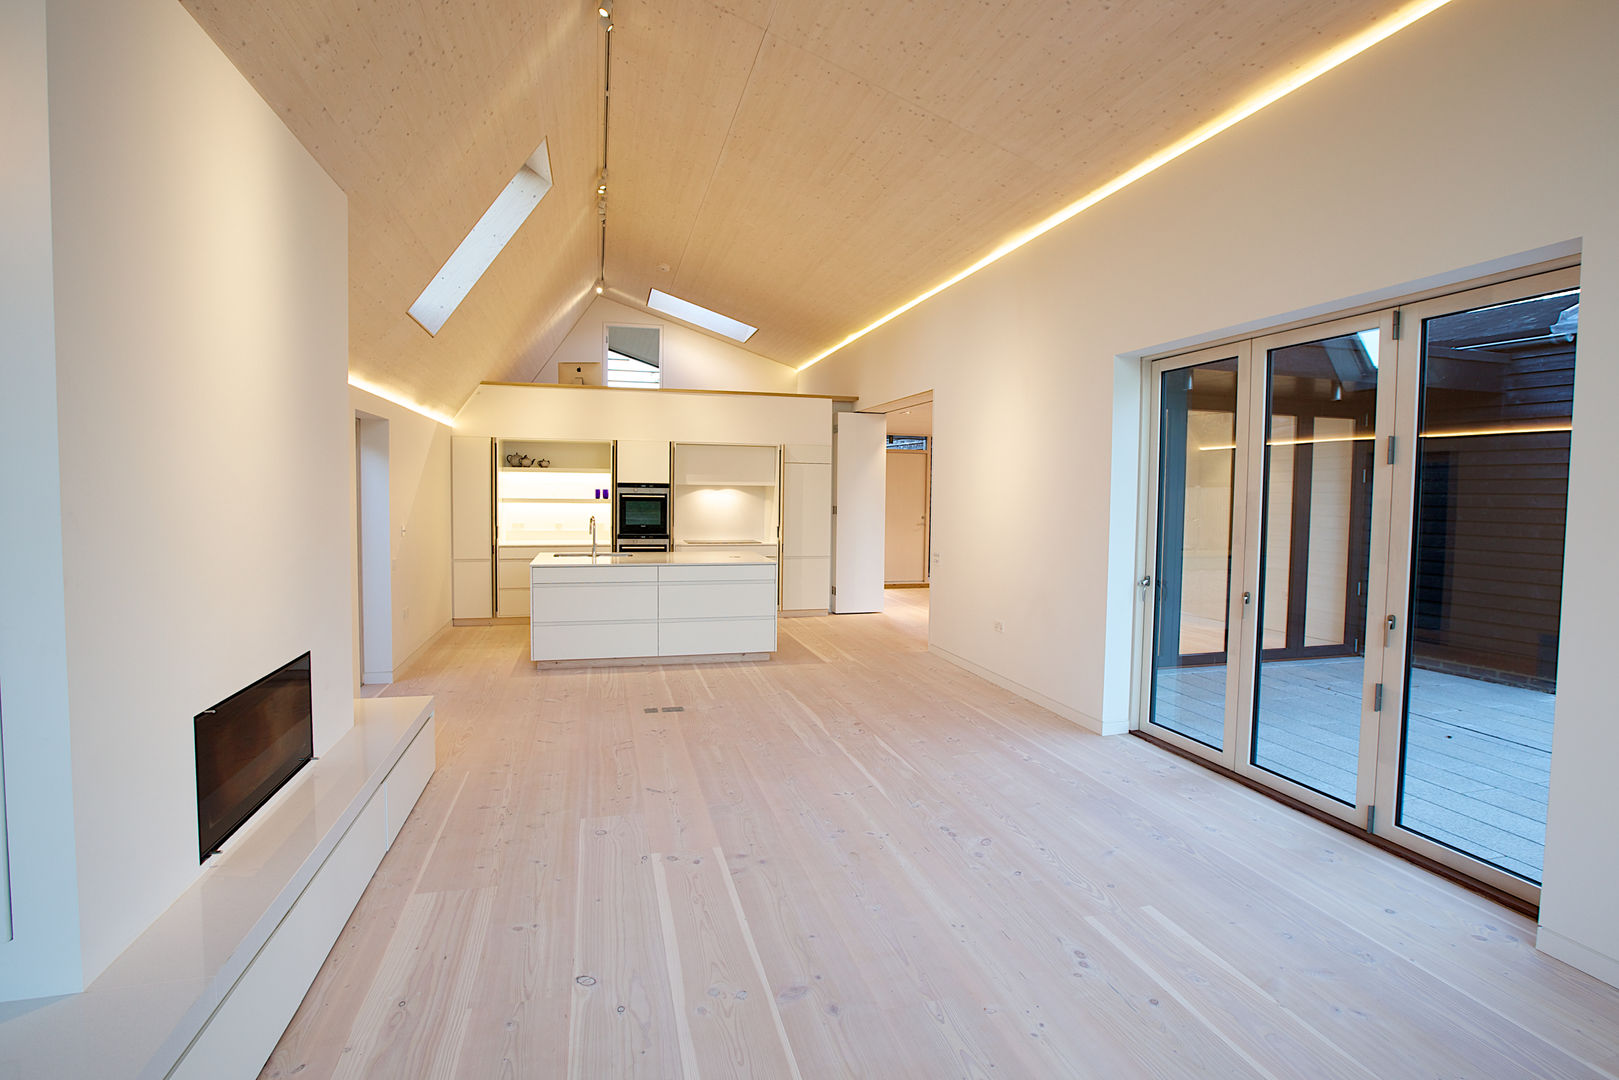 ​The open plan kitchen and living room at the Bourne Lane Eco House. Nash Baker Architects Ltd Salones modernos